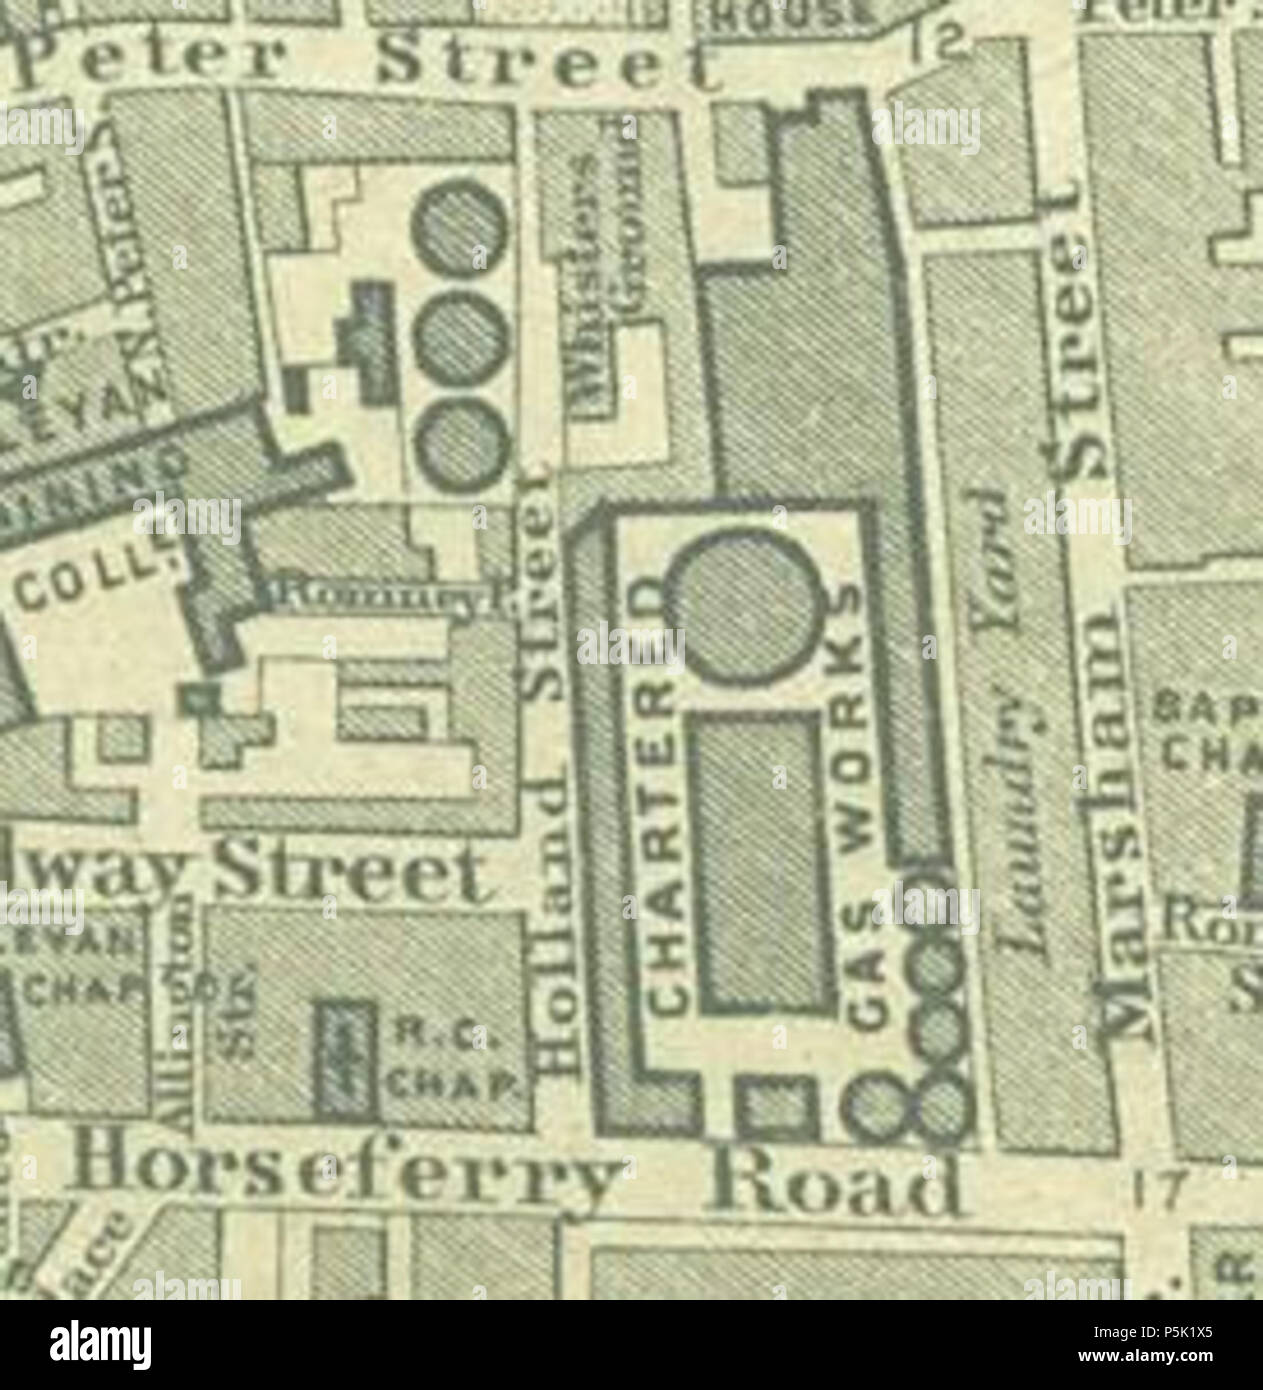 N/A. The Chartered Gas Works of the Gas Light and Coke Company, on what is now the site of the Home Office at 2 Marsham Street, as indicated in the 1862 Edward Stanford map of London . 1862.   Edward Stanford  (1827–1904)    Alternative names Edward Stanford Ltd.  Description British cartographer and businessman  Date of birth/death 27 May 1827 3 November 1904  Location of birth London  Authority control  : Q3655695 VIAF:64789974 ISNI:0000 0001 0909 8137 LCCN:no96065448 NLA:36446943 Open Library:OL5133506A WorldCat 33 2 Marsham Street, London - Stanford Map of London, 1862 Stock Photo